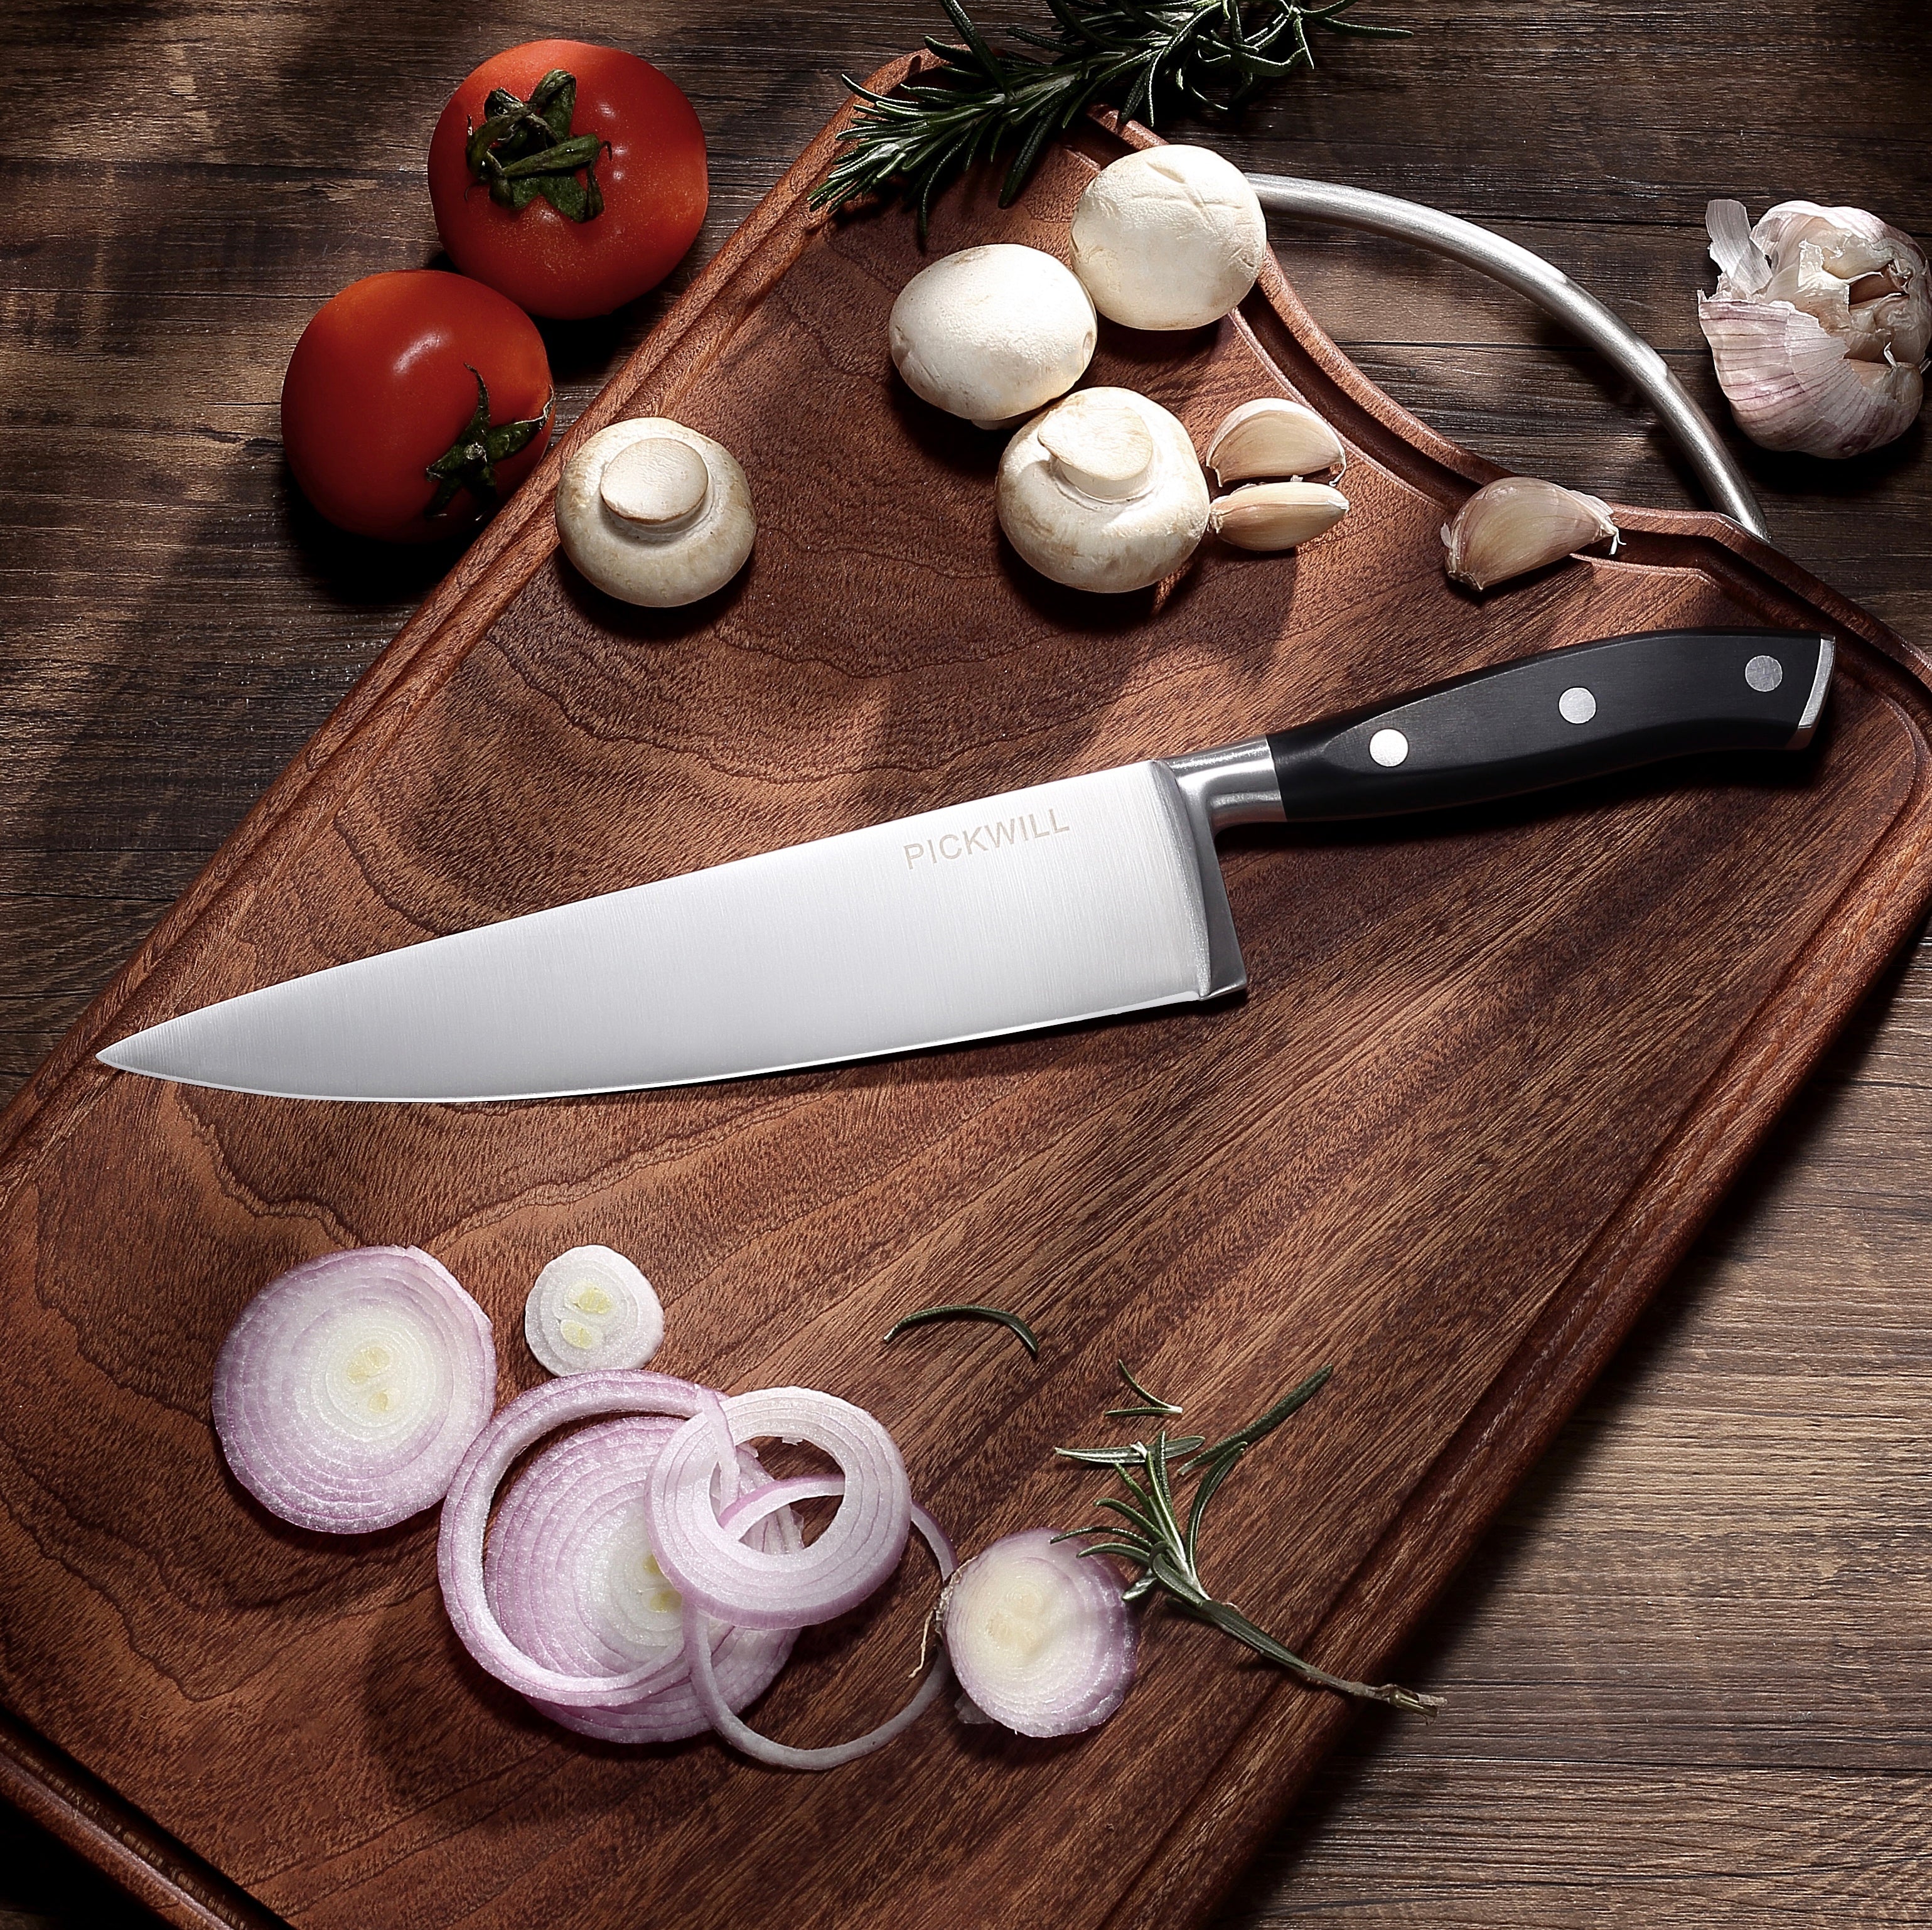  PICKWILL Chef Knife, 8 Inch Professional Kitchen